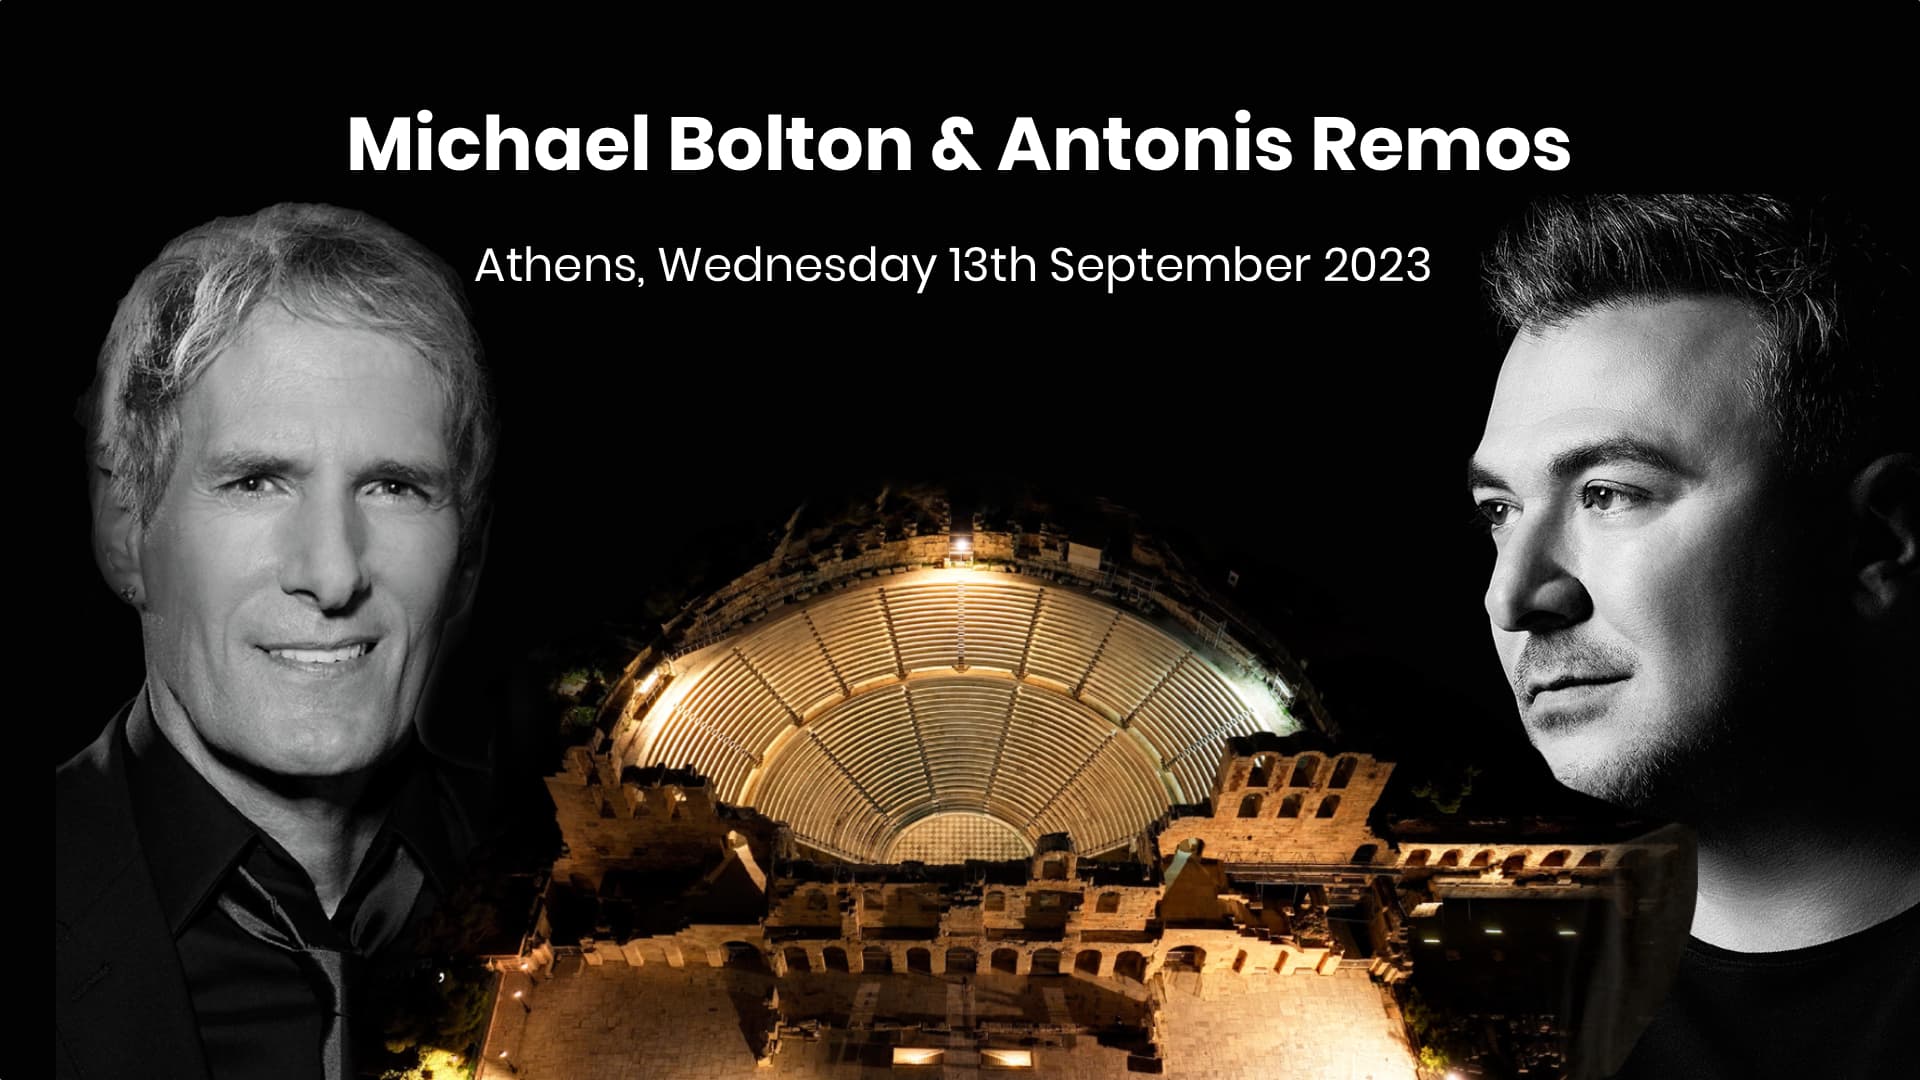 Michael Bolton & Antonis Remos in Concert at Herodion, Athens